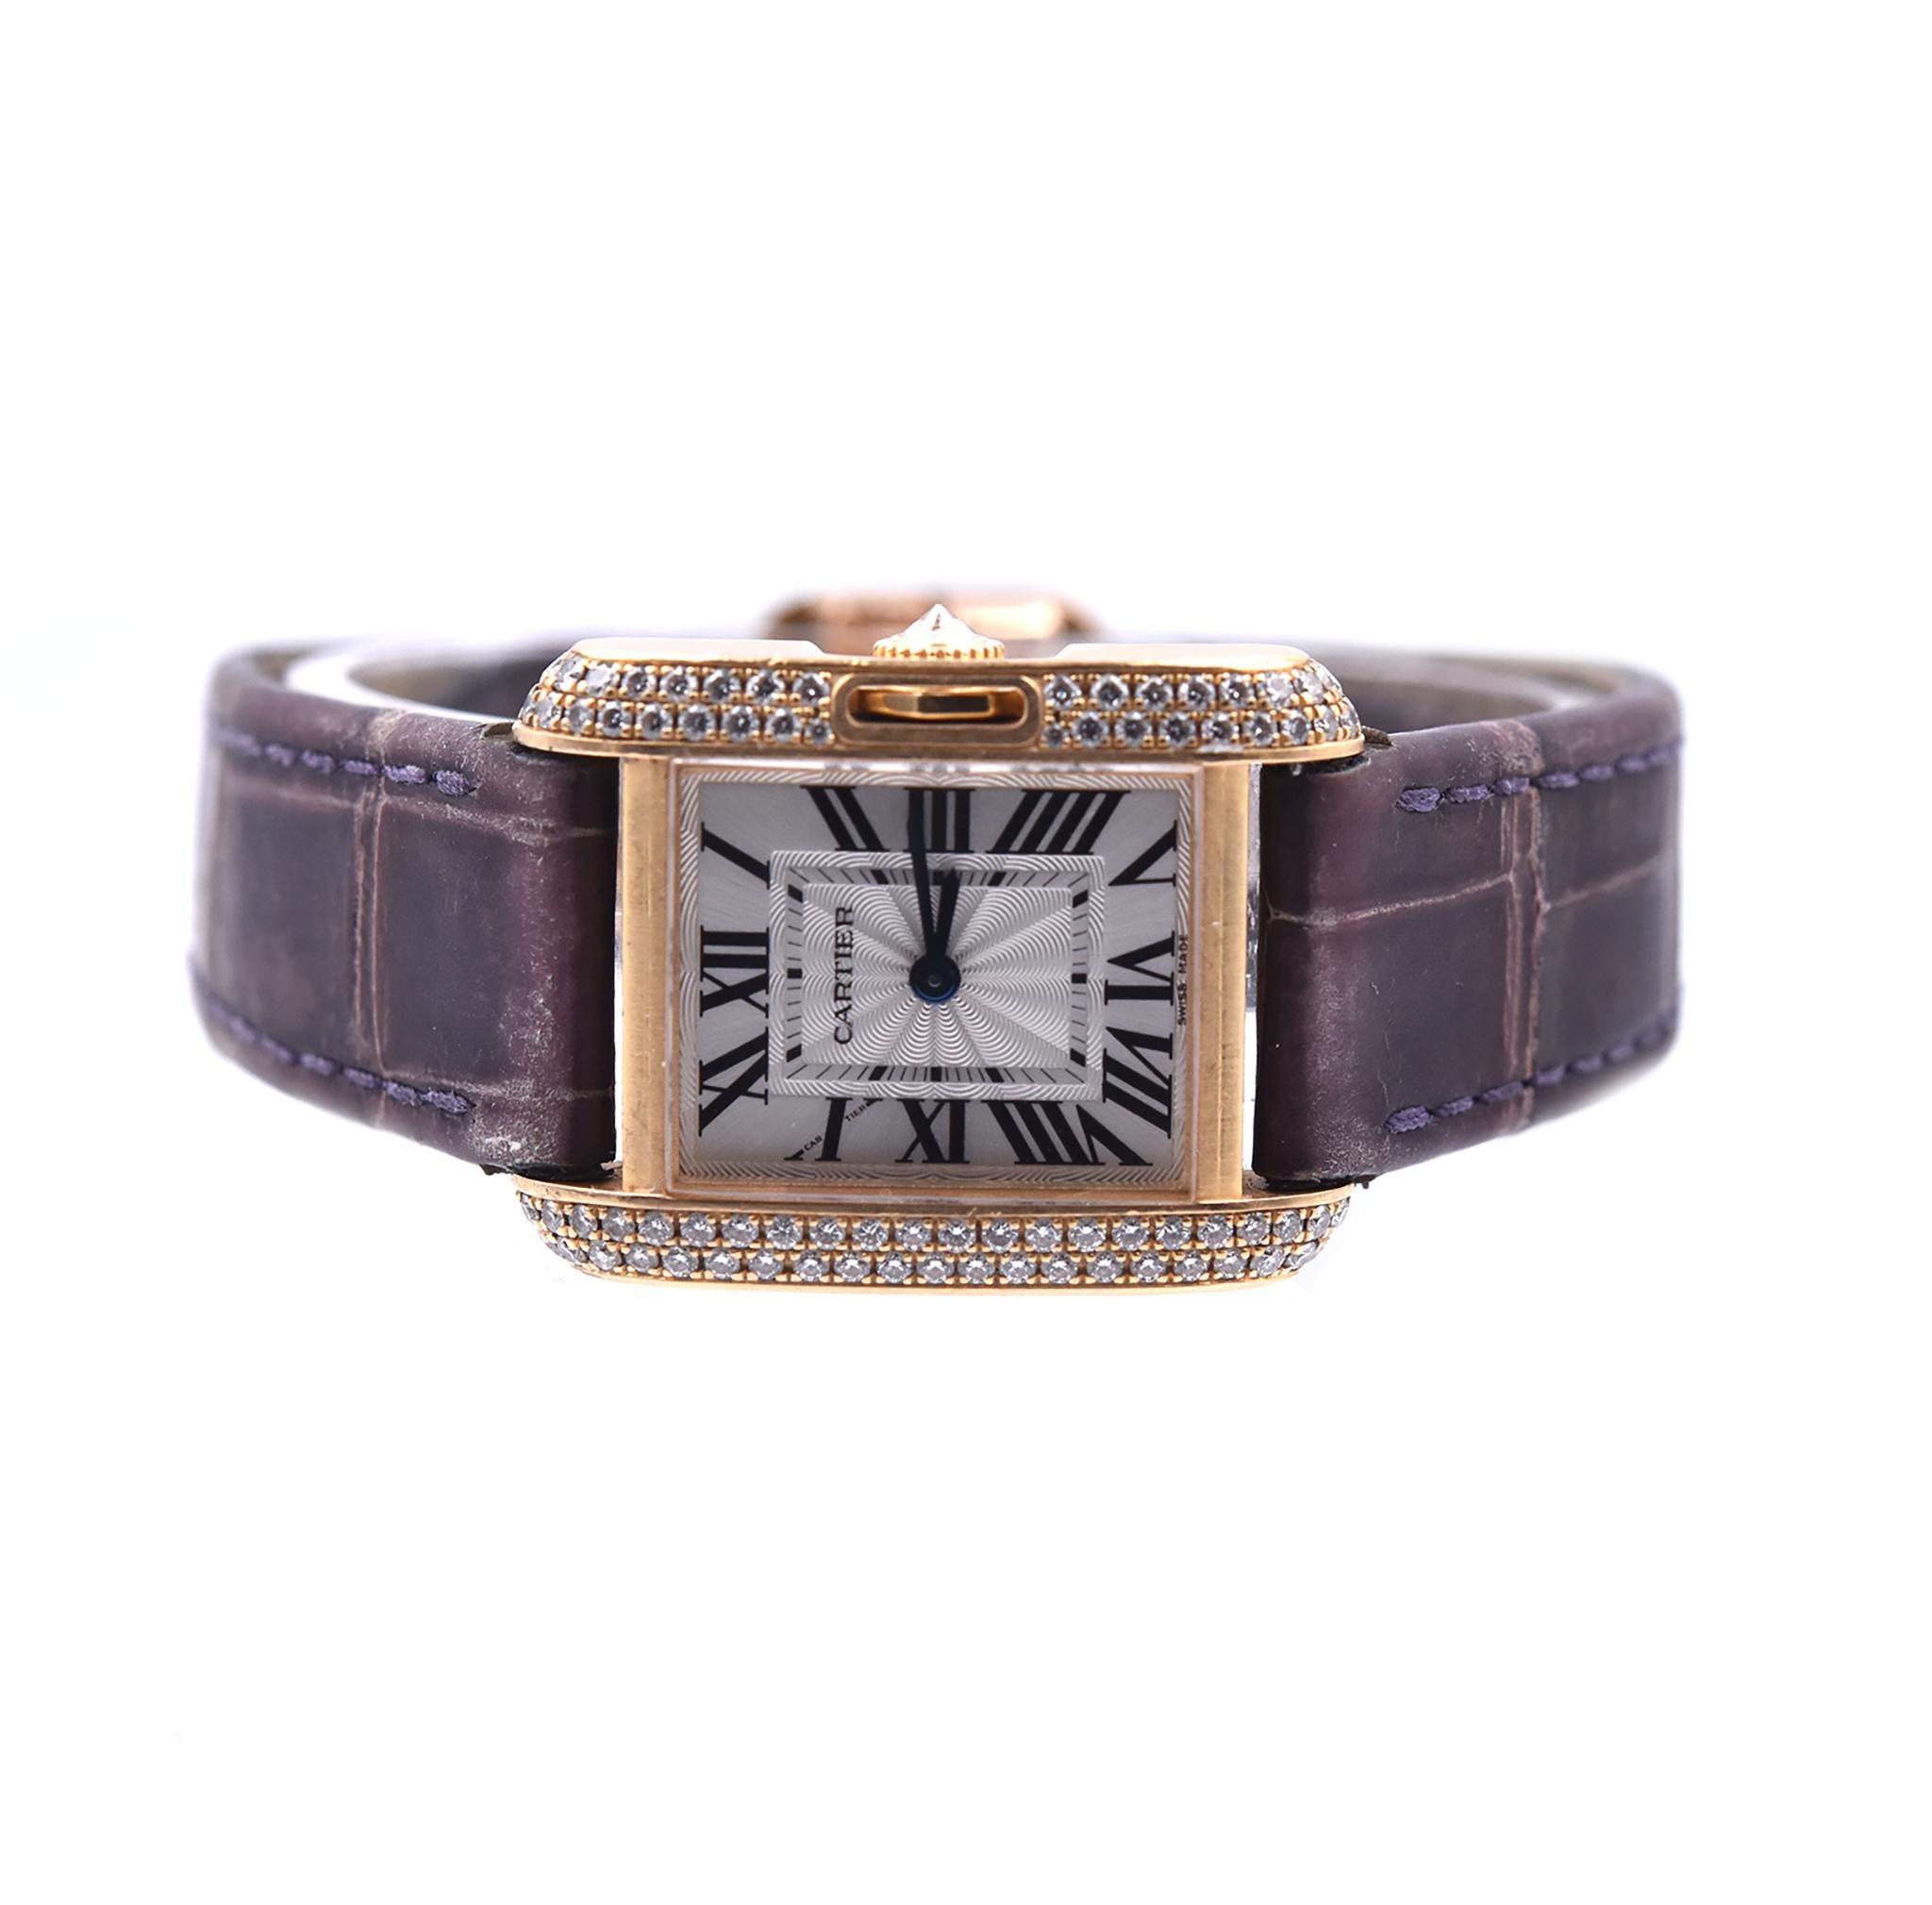 Movement: quartz
Function: hours, minutes
Case: 30mm stainless steel case, push pull crown, sapphire crystal
Dial: silver dial, black transferred Roman numerals, and steel sword-shaped hands
Band: brown Cartier leather strap
Serial #: